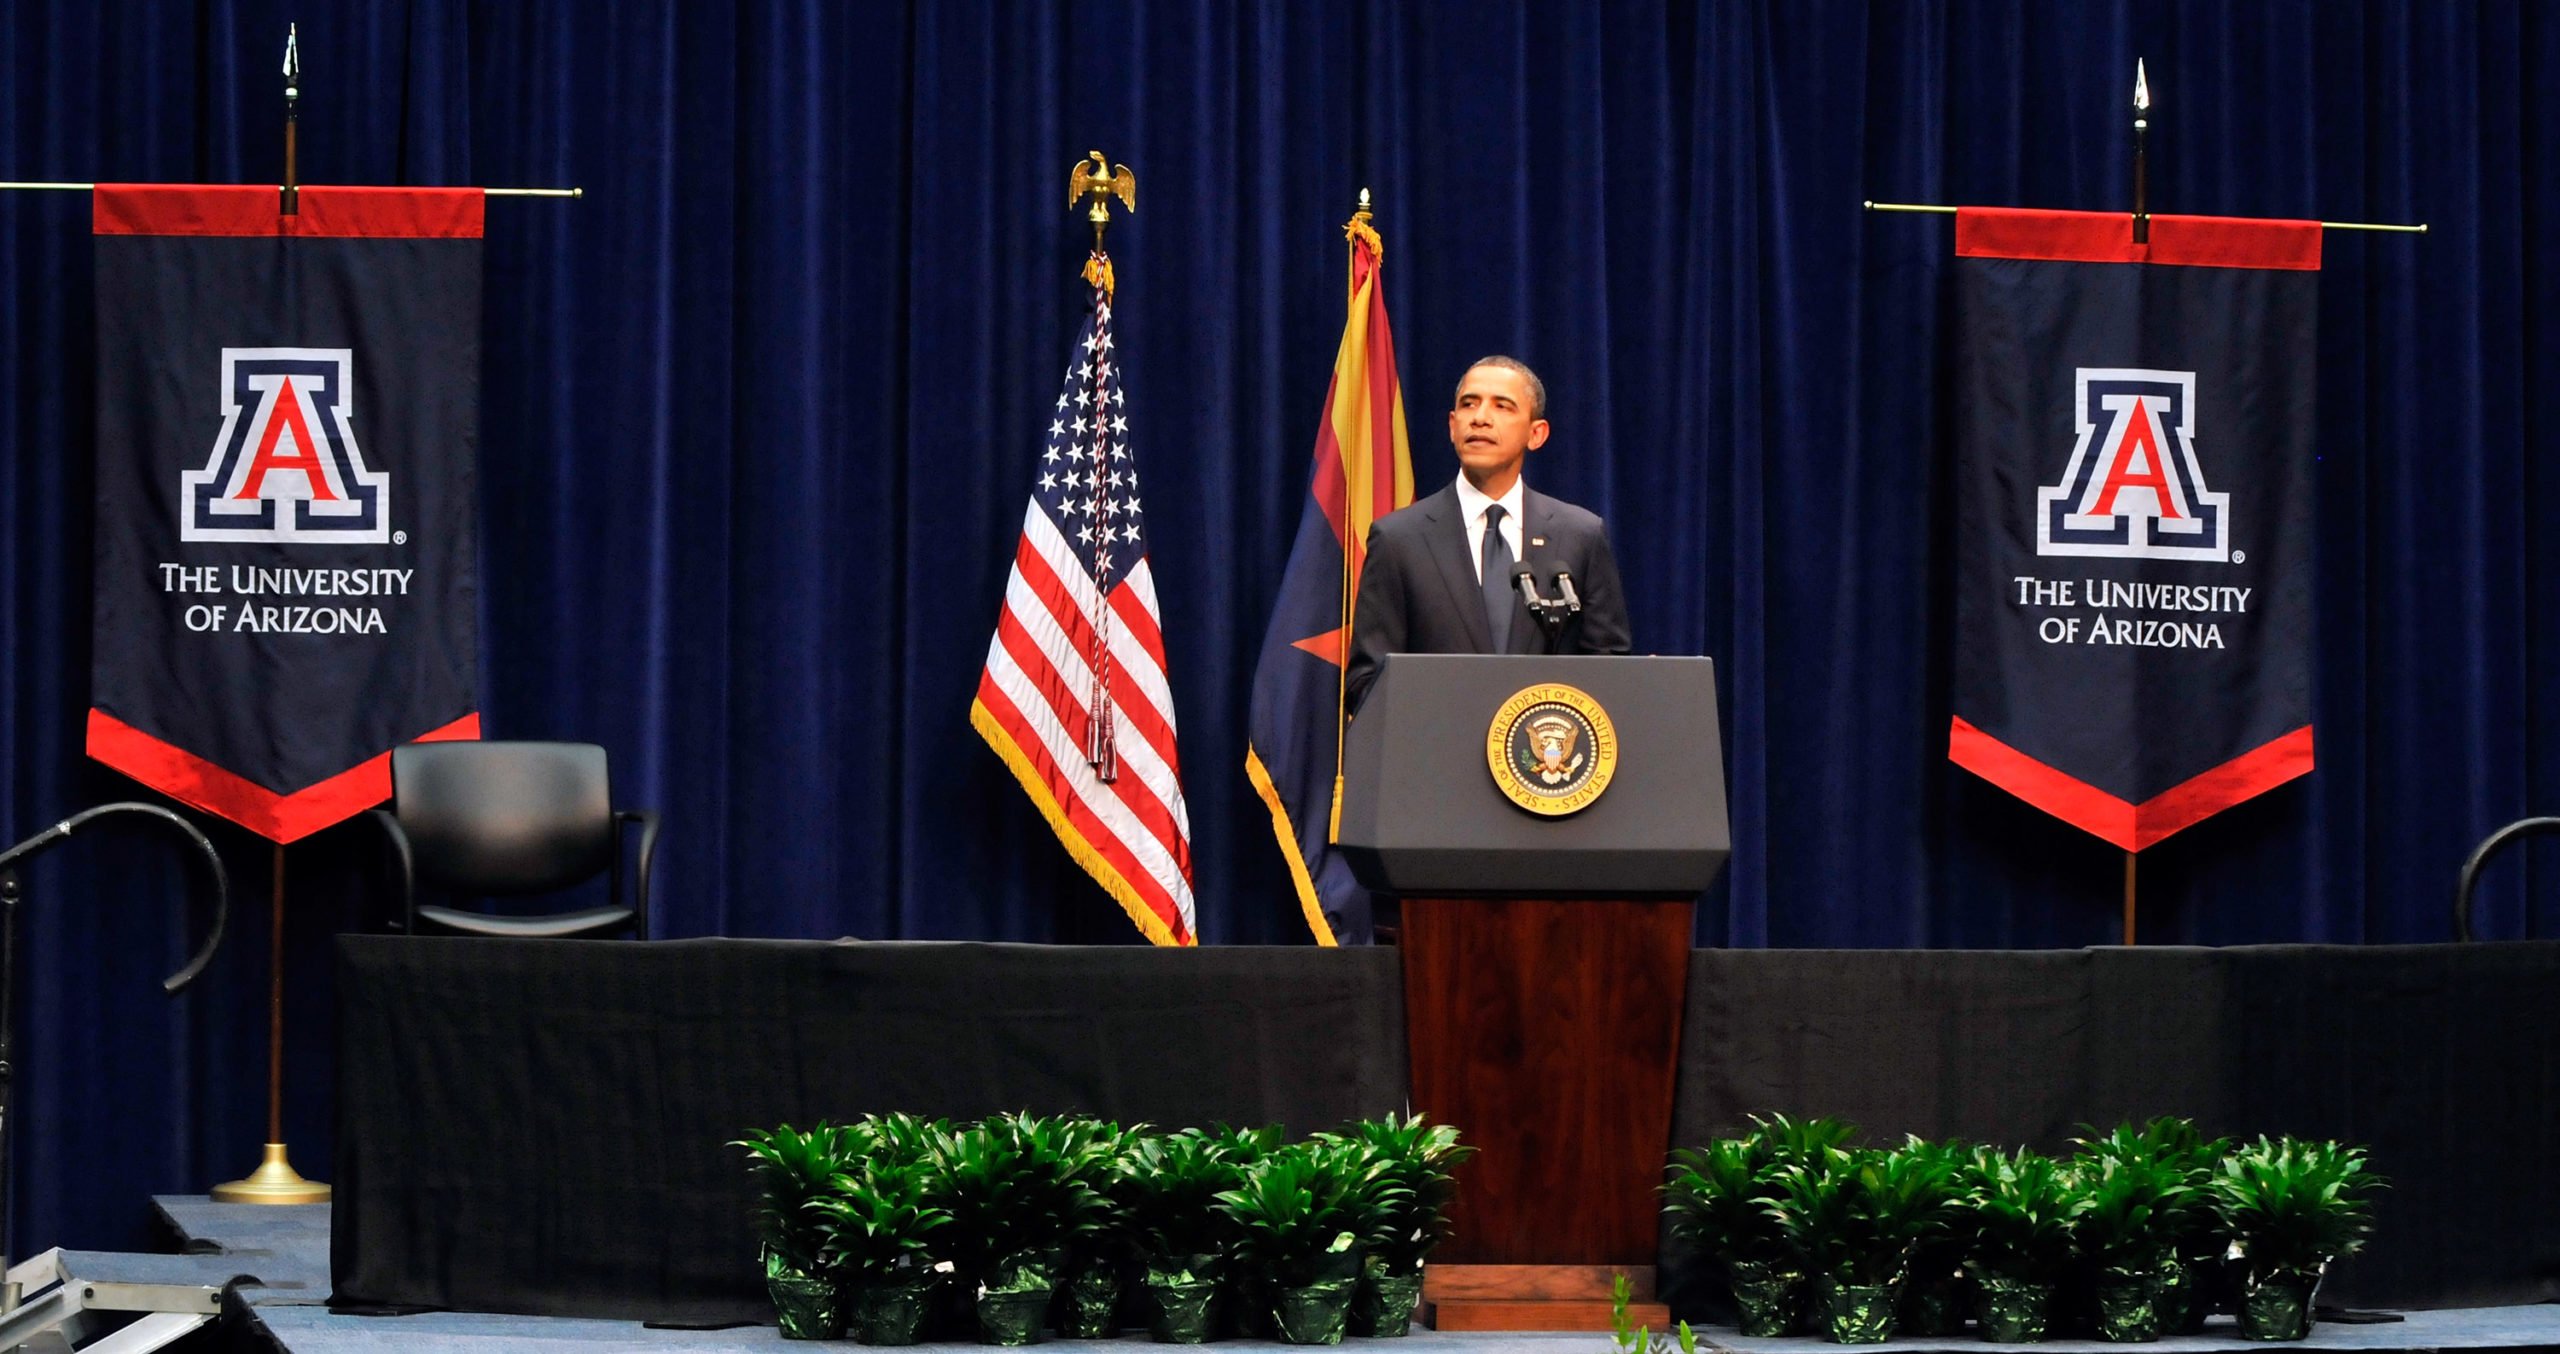 President Barack Obama gives his speech at the event 'Together We Thrive: Tucson and America' honoring the January 8 shooting victims at McKale Memorial Center on the University of Arizona campus on January 12, 2011 in Tucson, Arizona. The memorial service is in honor of victims of the mass shooting at a Safeway grocery store that killed six and injured at least 13 others, including U.S. Rep. Gabrielle Giffords (D-AZ), who remains in critical condition after being shot in the head. Among those killed were U.S. District Judge John Roll, 63; Giffords' director of community outreach, Gabe Zimmerman, 30; and 9-year-old Christina Taylor Green. (Photo by David Becker/Getty Images)